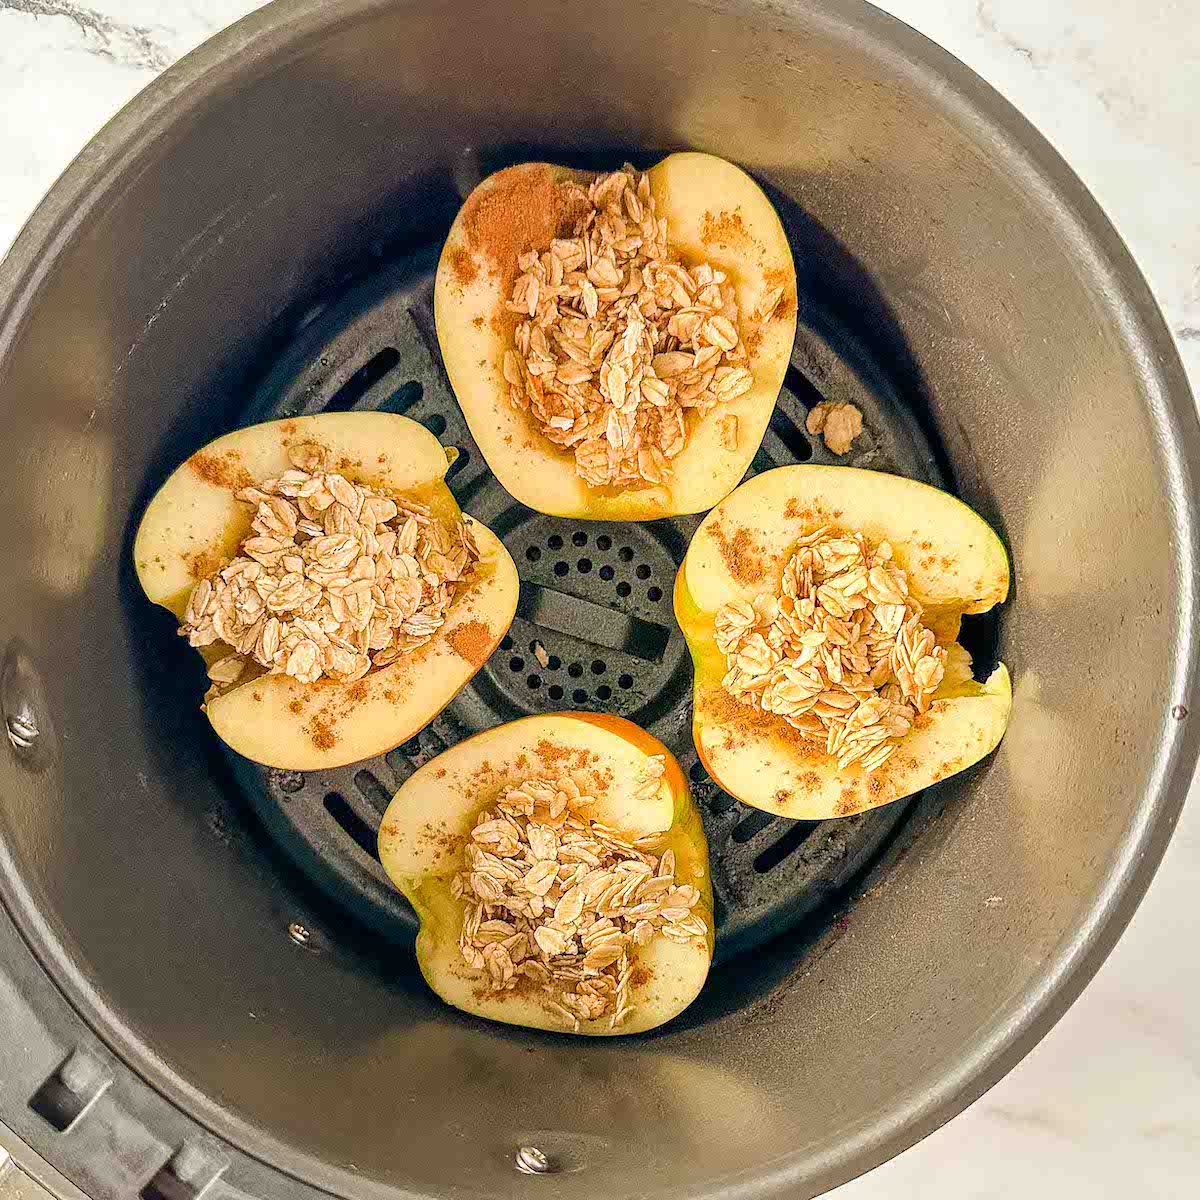 Apples filled with oat, cinnamon, maple mixture in an air fryer basket.